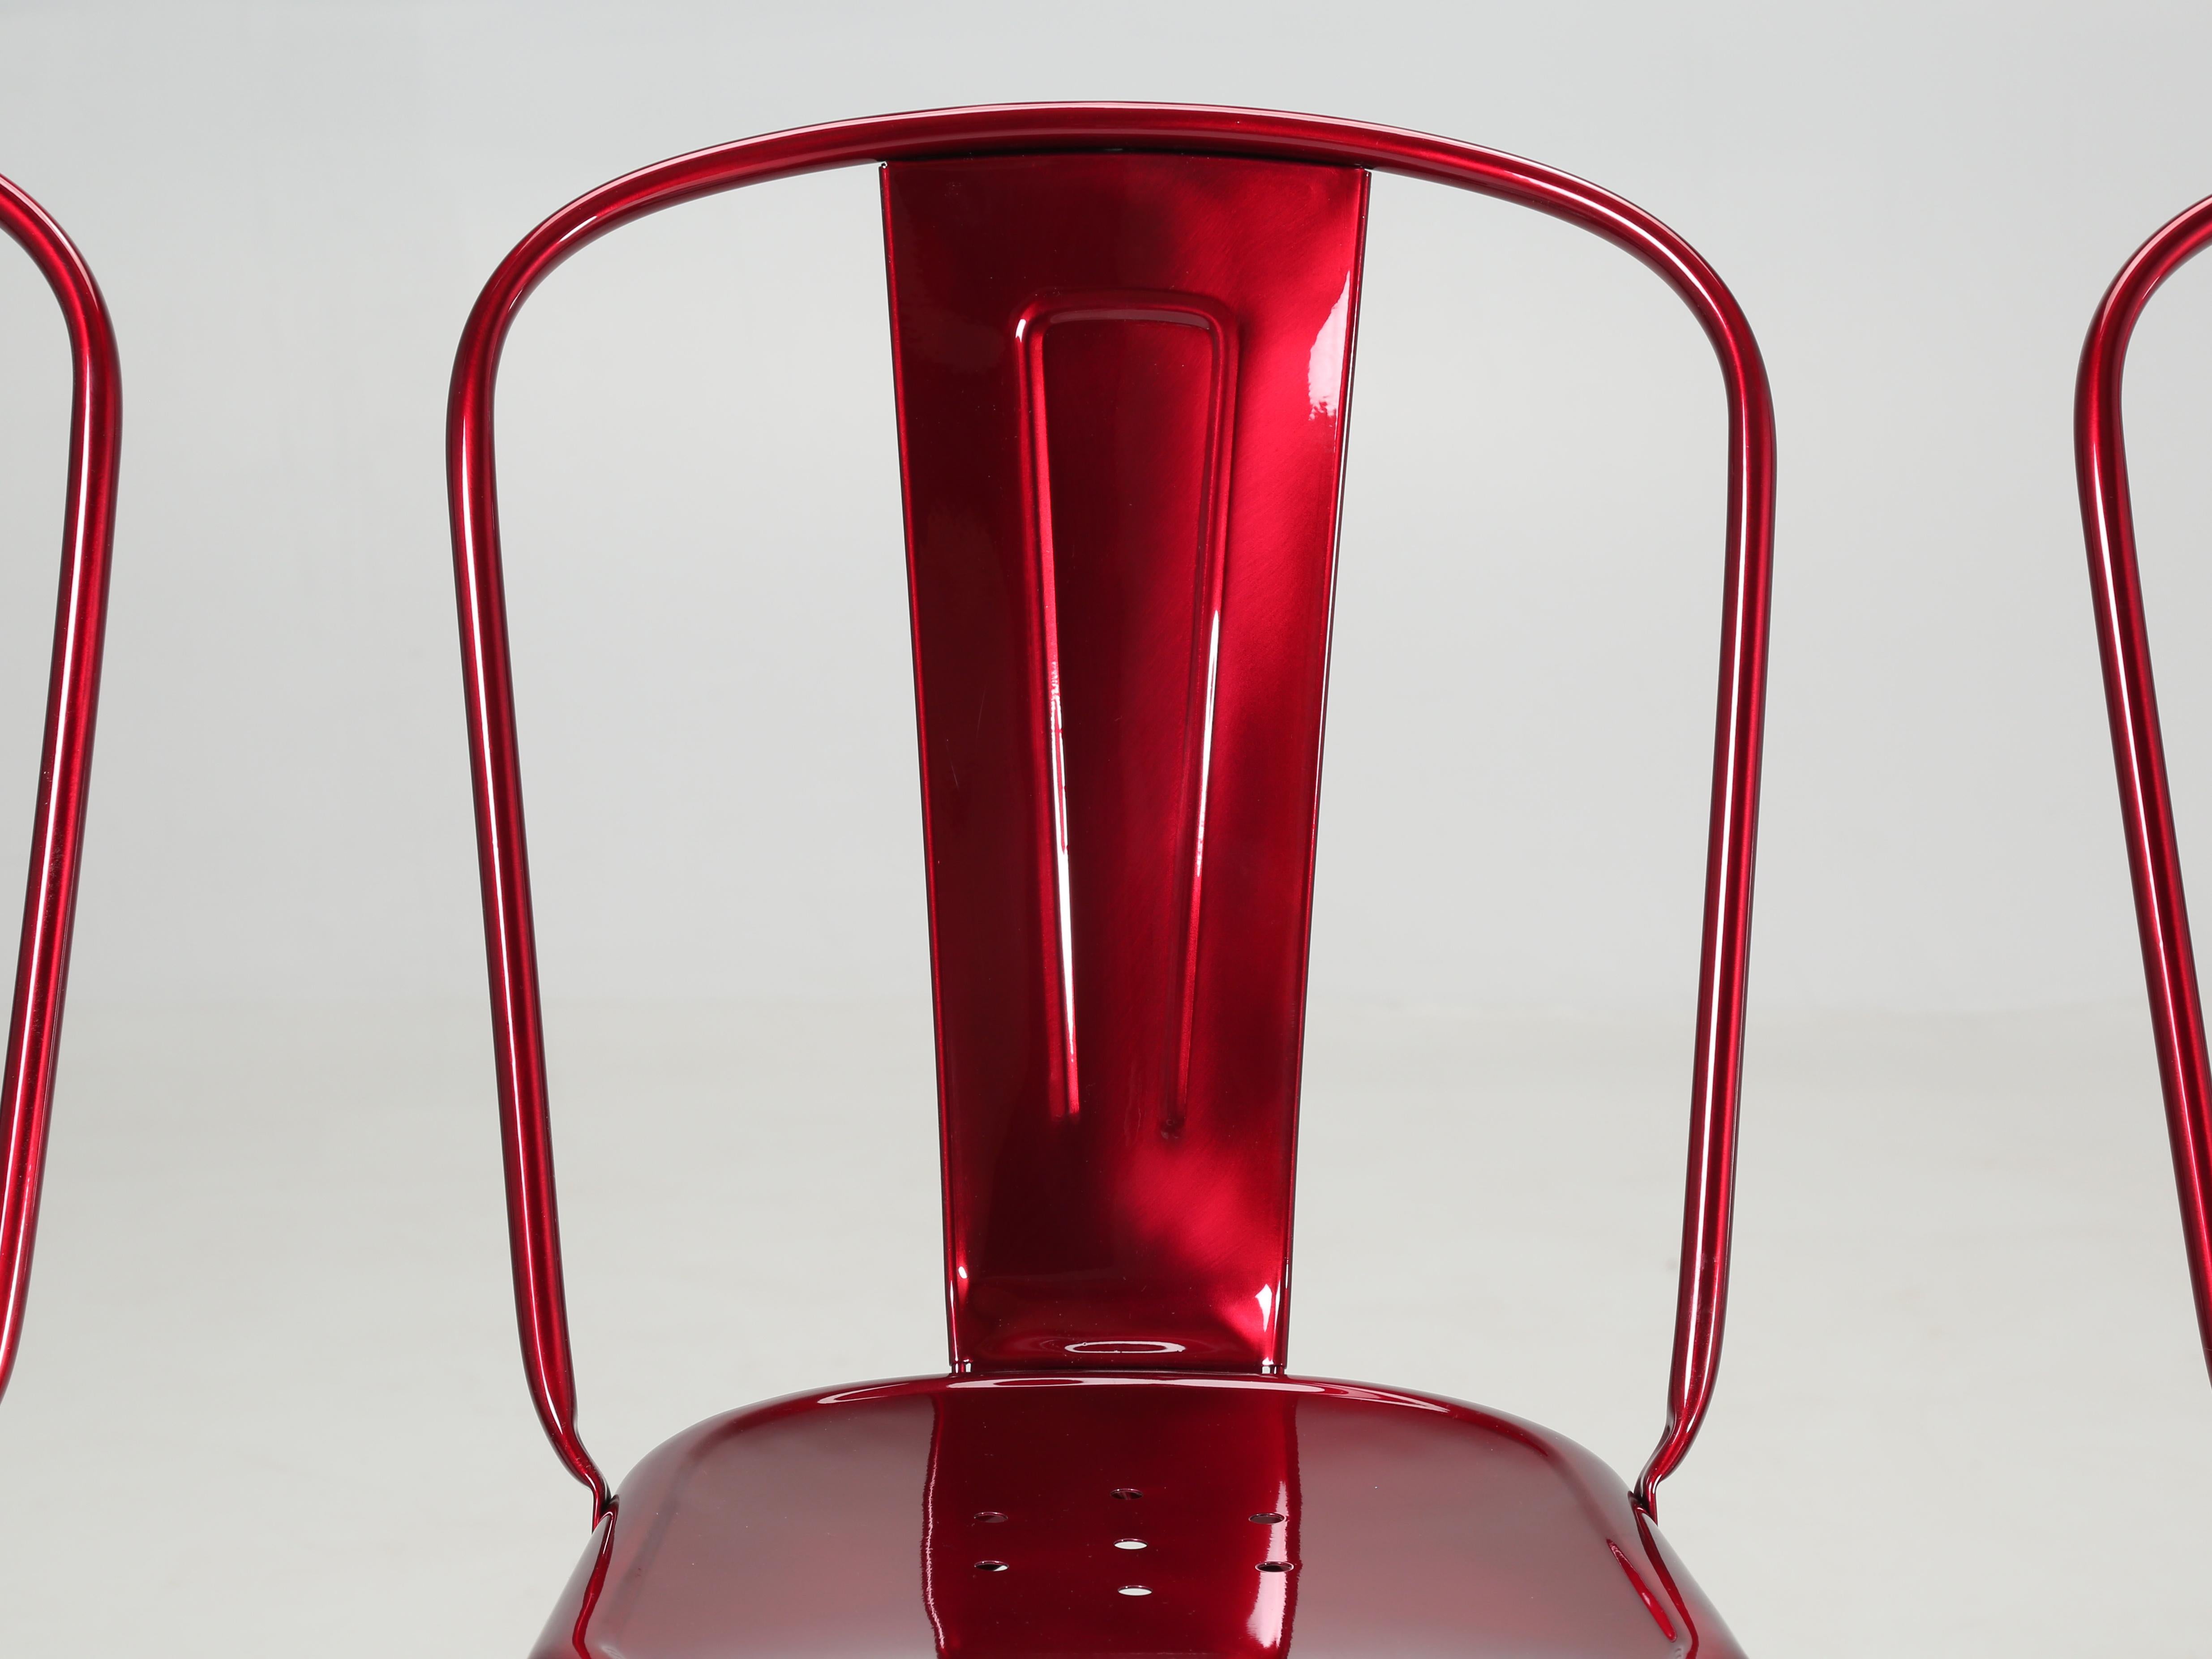 Hand-Crafted Tolix Set of (4) Steel Stacking Chairs in a Brilliant Candy Apple Red Metallic